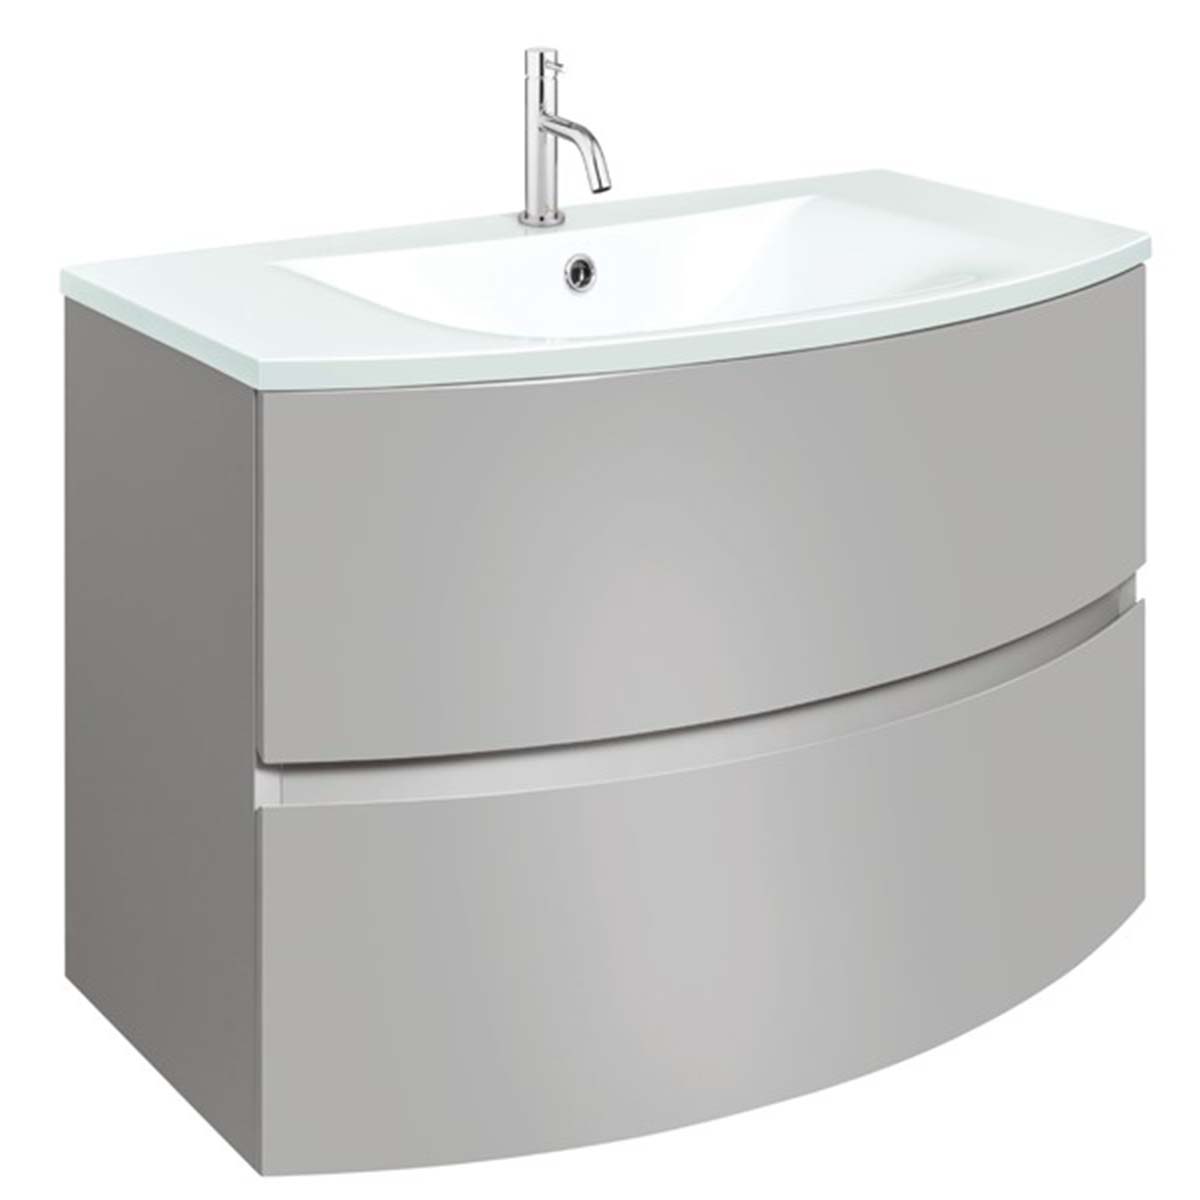 Crosswater Svelte 800mm Double Drawer Wall Hung Vanity Unit-With Ice White Glass Basin Storm Grey Matt